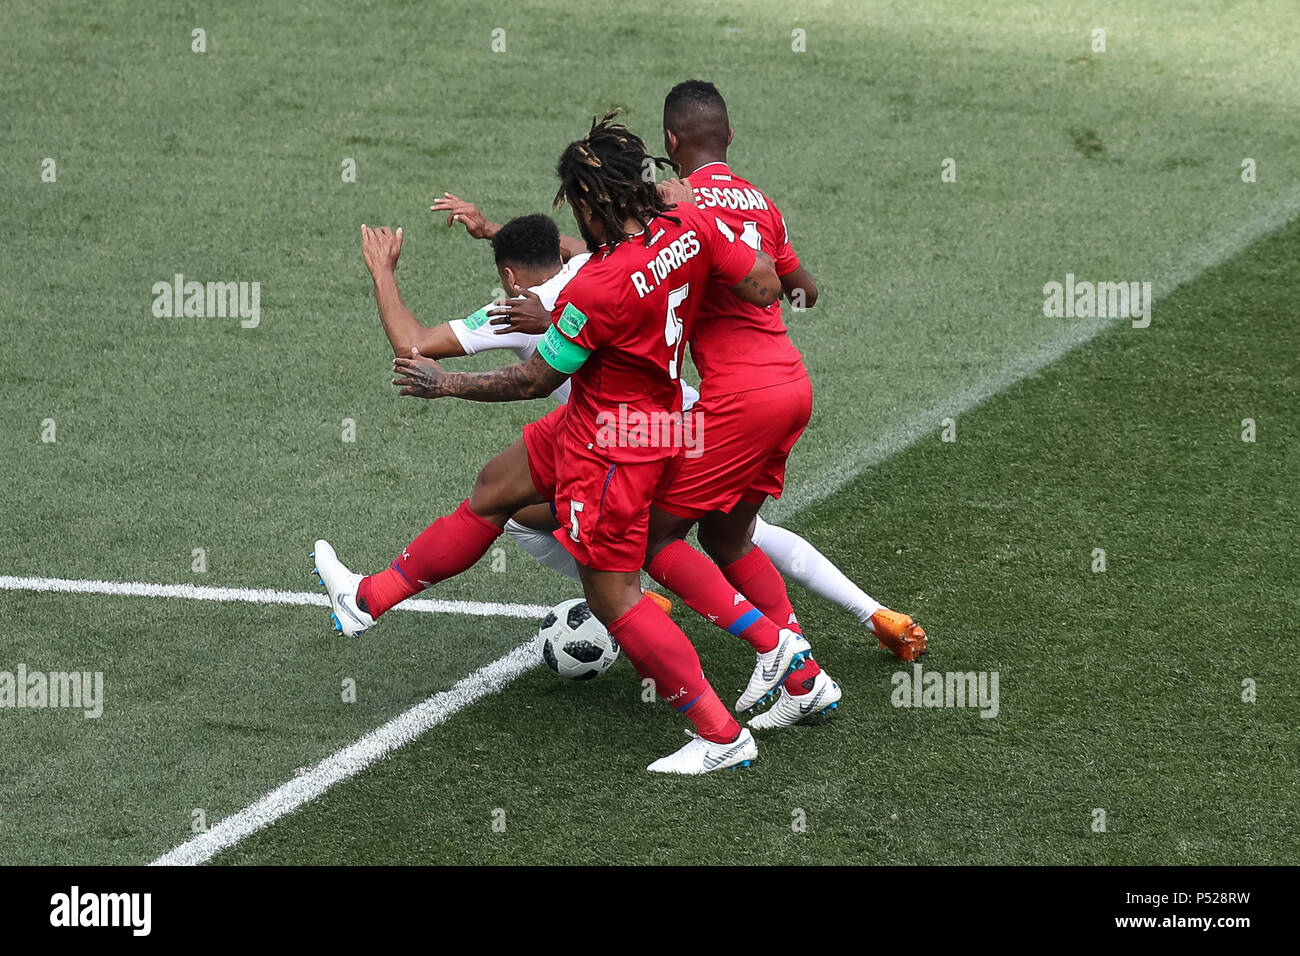 Nizhny Novgorod, Russia. 24th June, 2018. Jesse Lingard of England is fouled by Roman Torres of Panama and Fidel Escobar of Panama for England's first penalty during the 2018 FIFA World Cup Group G match between England and Panama at Nizhny Novgorod Stadium on June 24th 2018 in Nizhny Novgorod, Russia. (Photo by Daniel Chesterton/phcimages.com) Credit: PHC Images/Alamy Live News Stock Photo